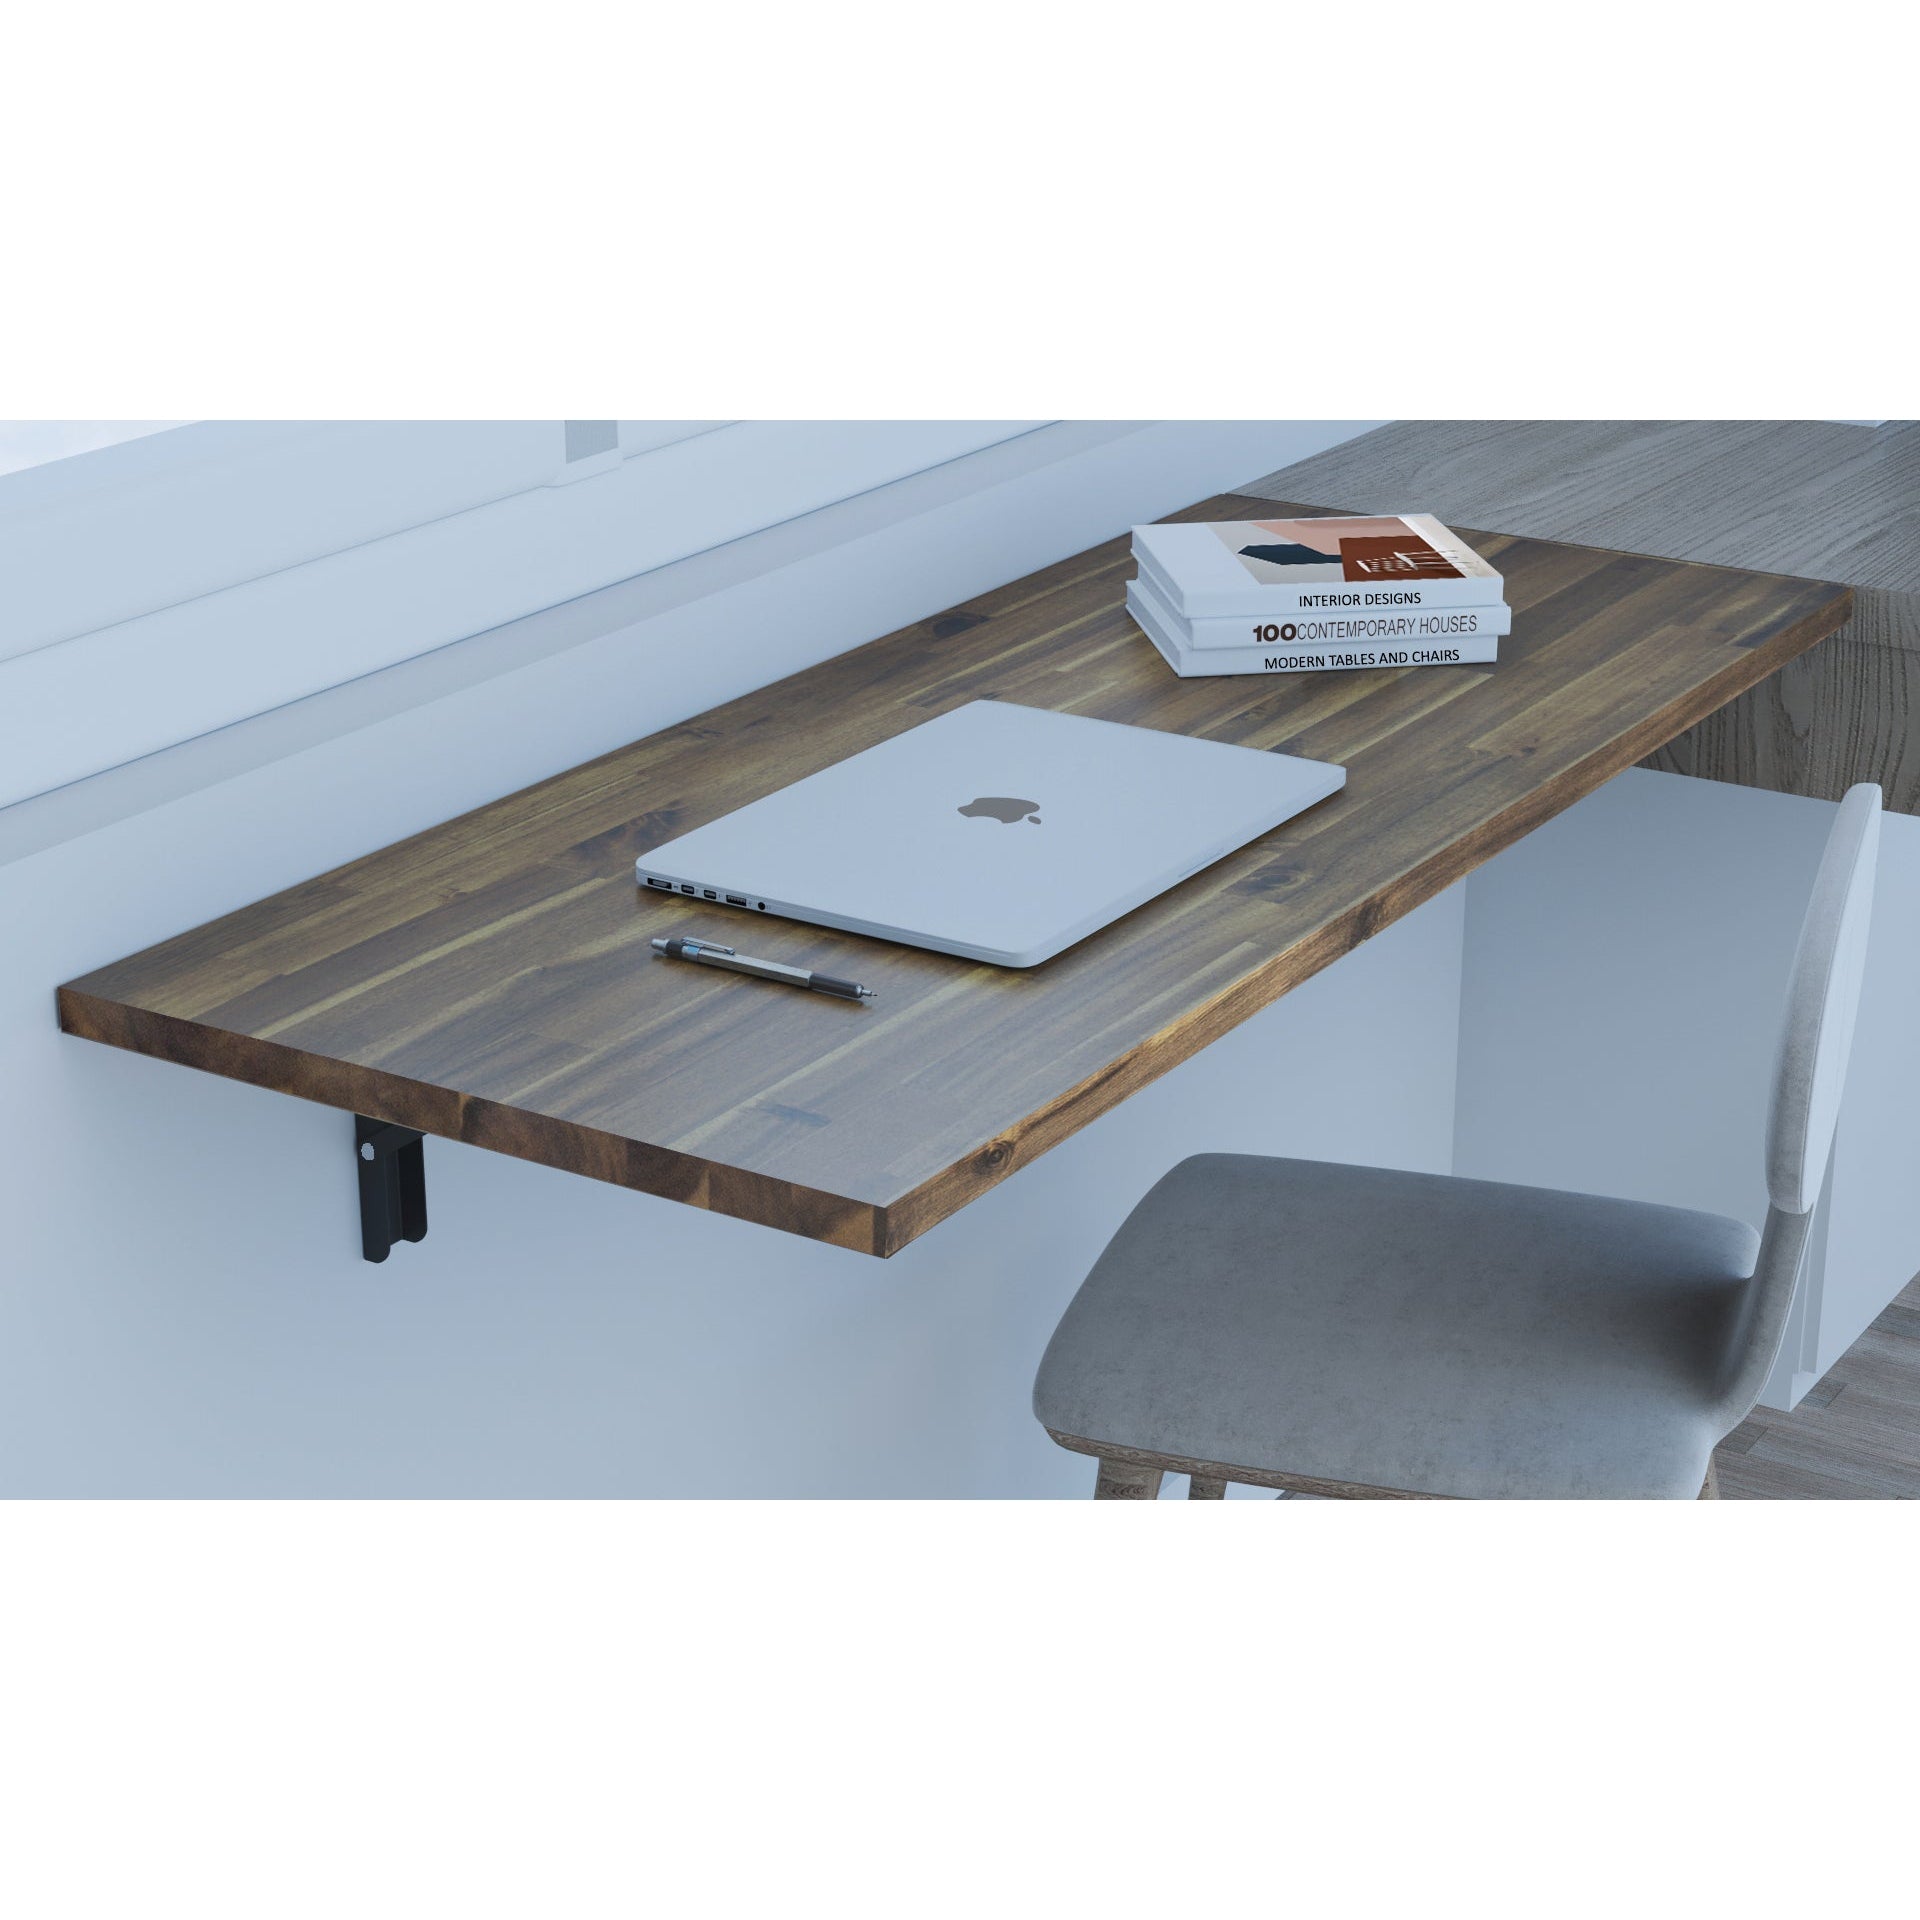 Durasheds Folding Tables DuraMax Spence 48" Wall Mounted Folding Workbench / Table/ Desk 20” x 48”